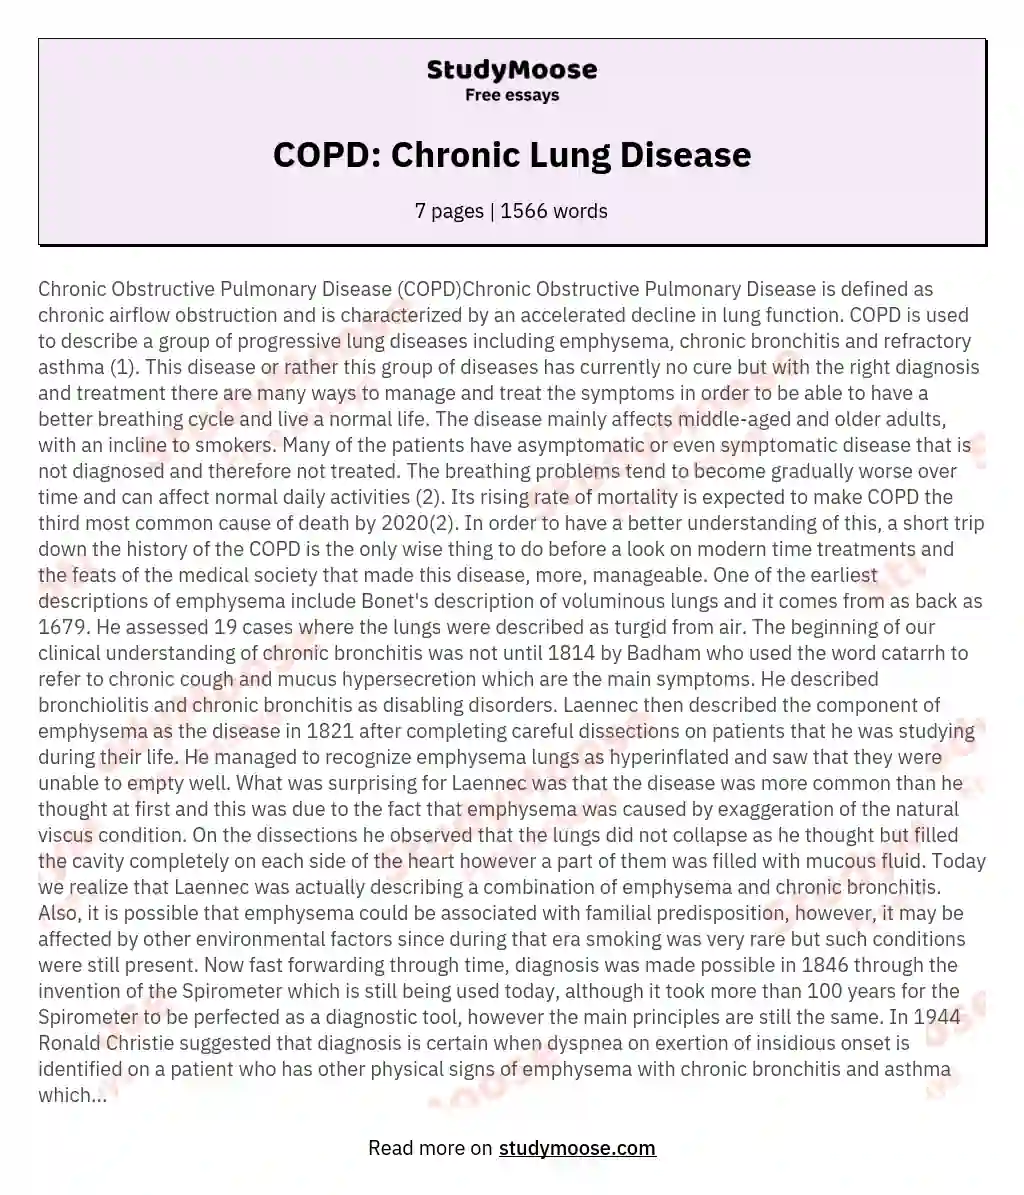 COPD: Chronic Lung Disease